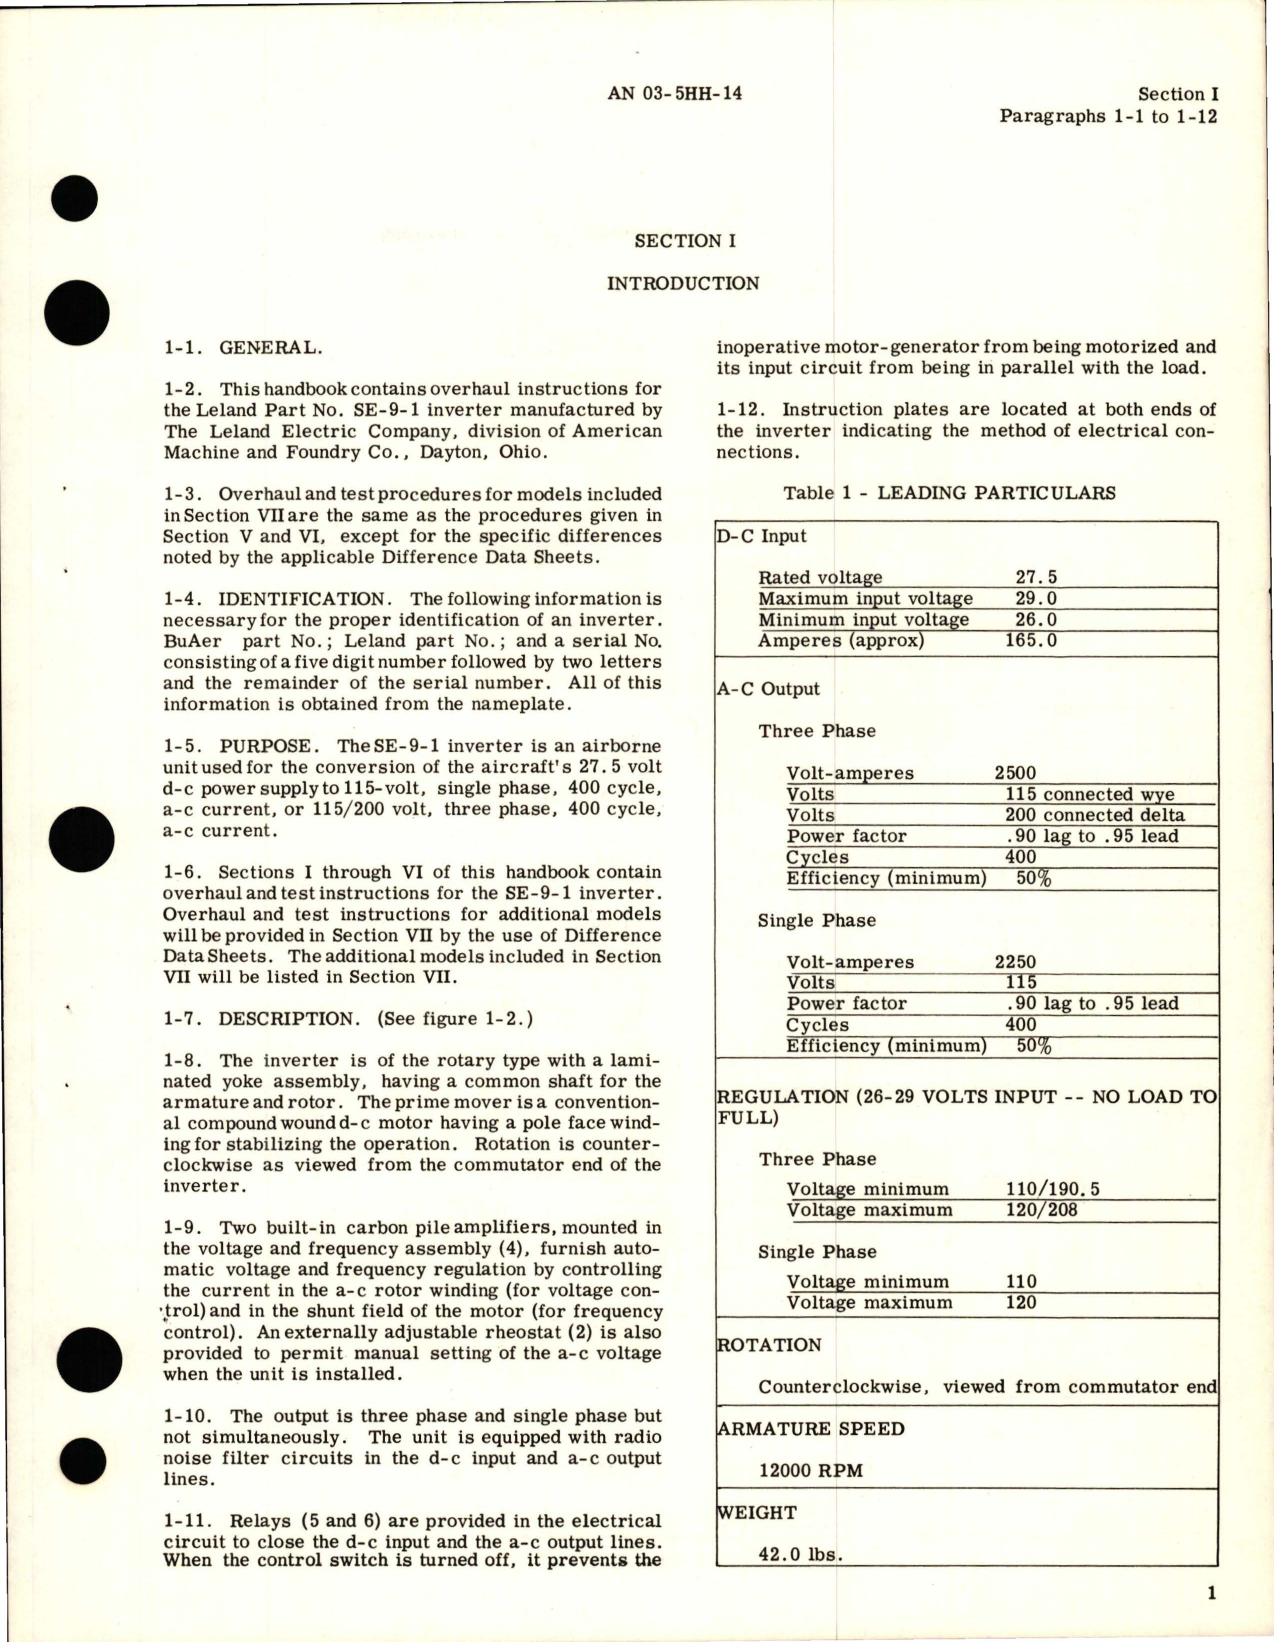 Sample page 5 from AirCorps Library document: Overhaul Instructions for Inverter - Part SE-9-1, and Motor Generator - Part SE-9-1-1A 